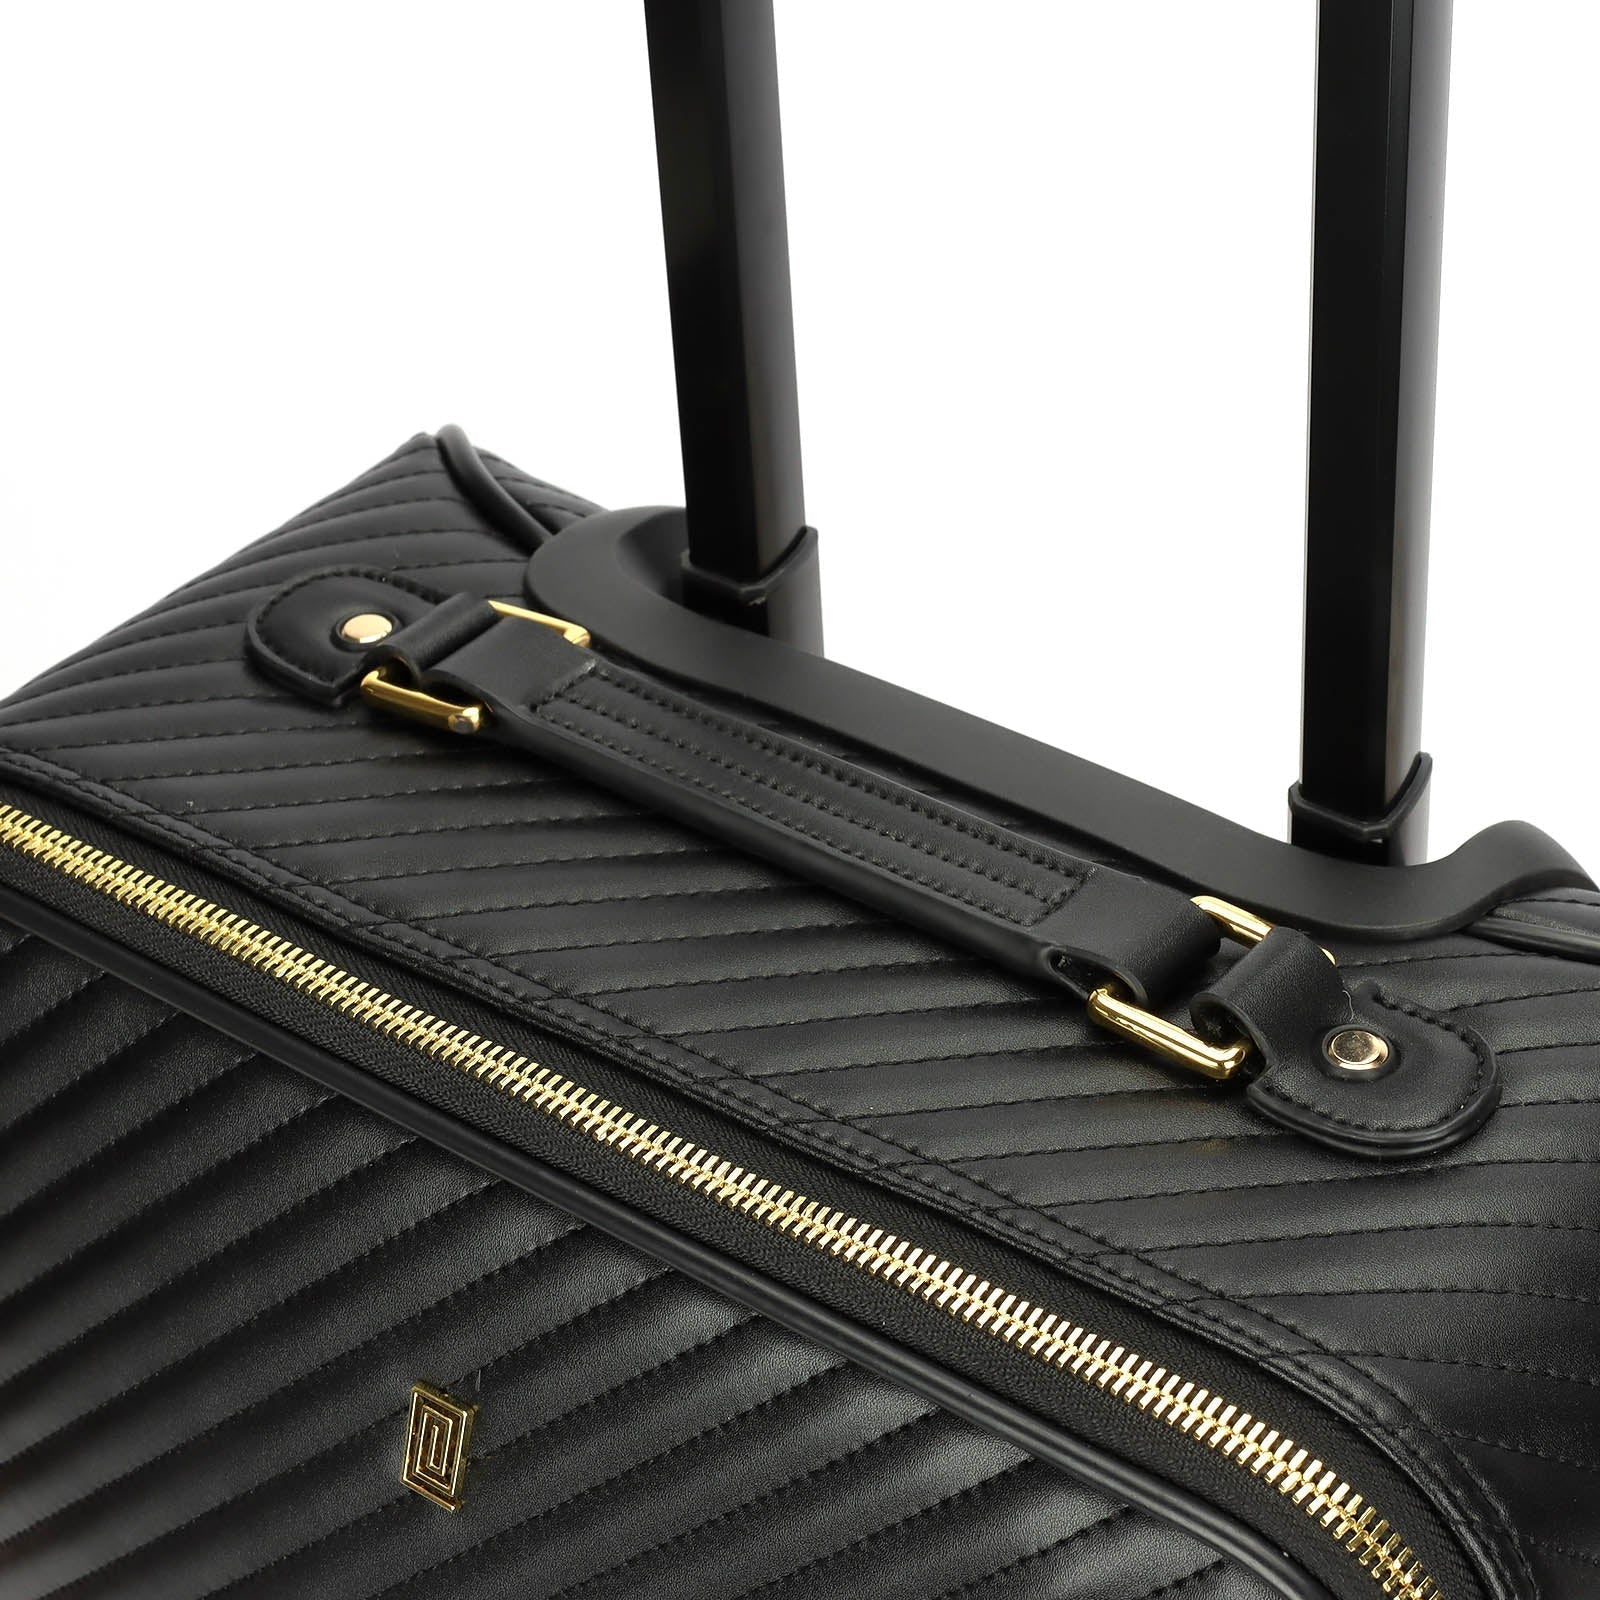 | OUTLET | EQUIP Carry-On Quilted Suitcase | Final Sale | NOTIQ